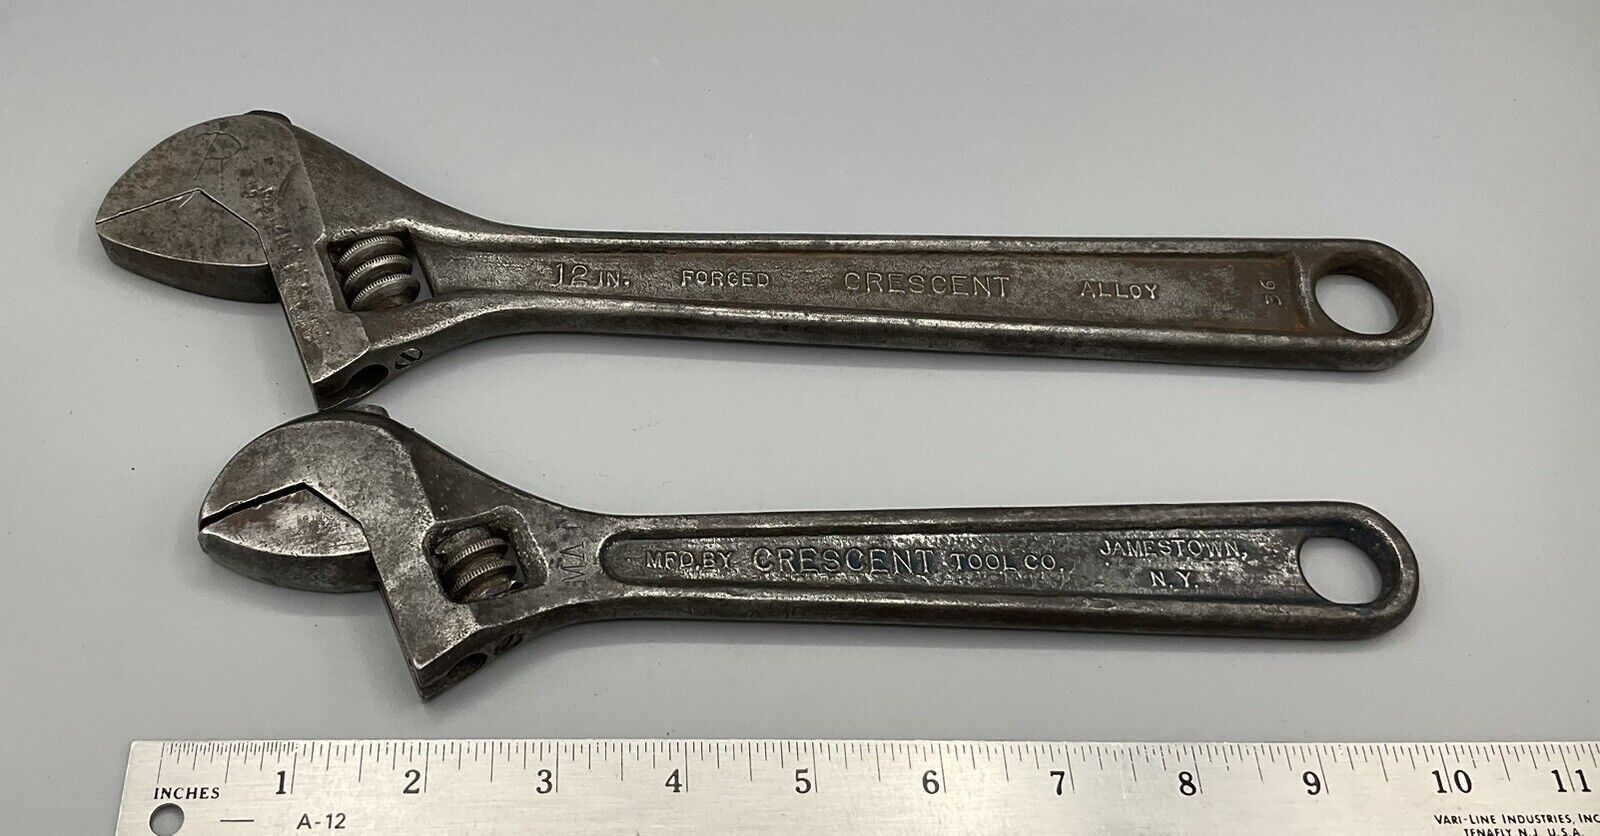 2 Vtg CRESCENT Tools Adjustable Wrenches 10” & 12” Jamestown, NY. USA Pair Set